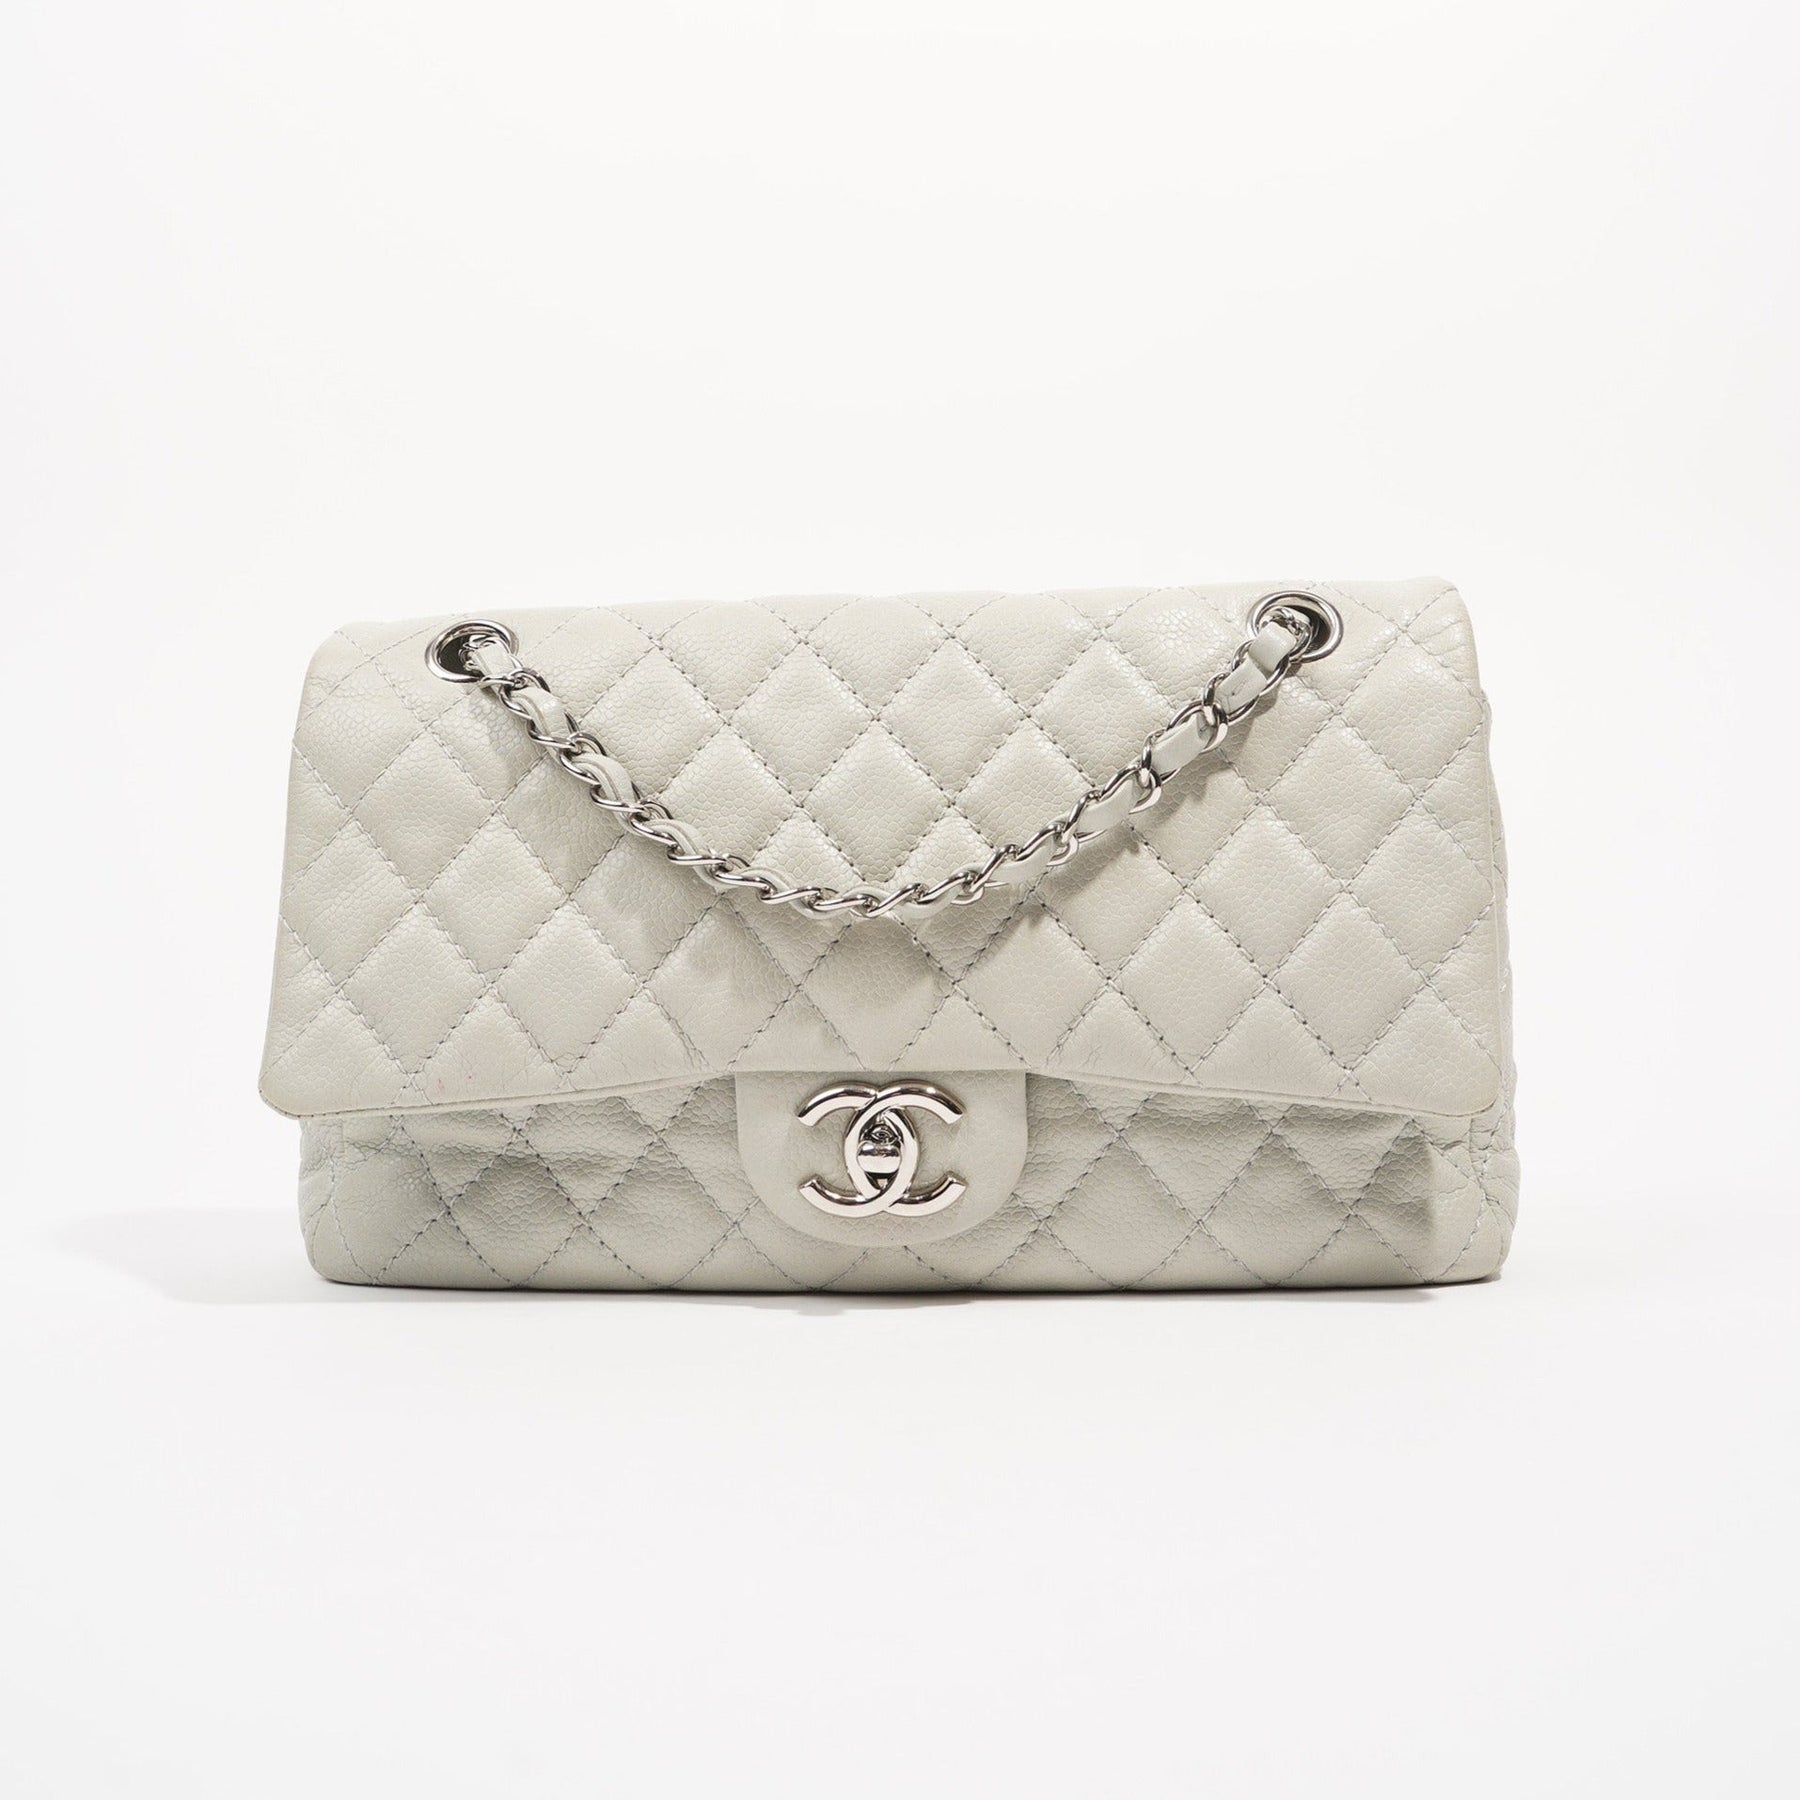 CHANEL CHANEL Caviar Large Bags & Handbags for Women, Authenticity  Guaranteed